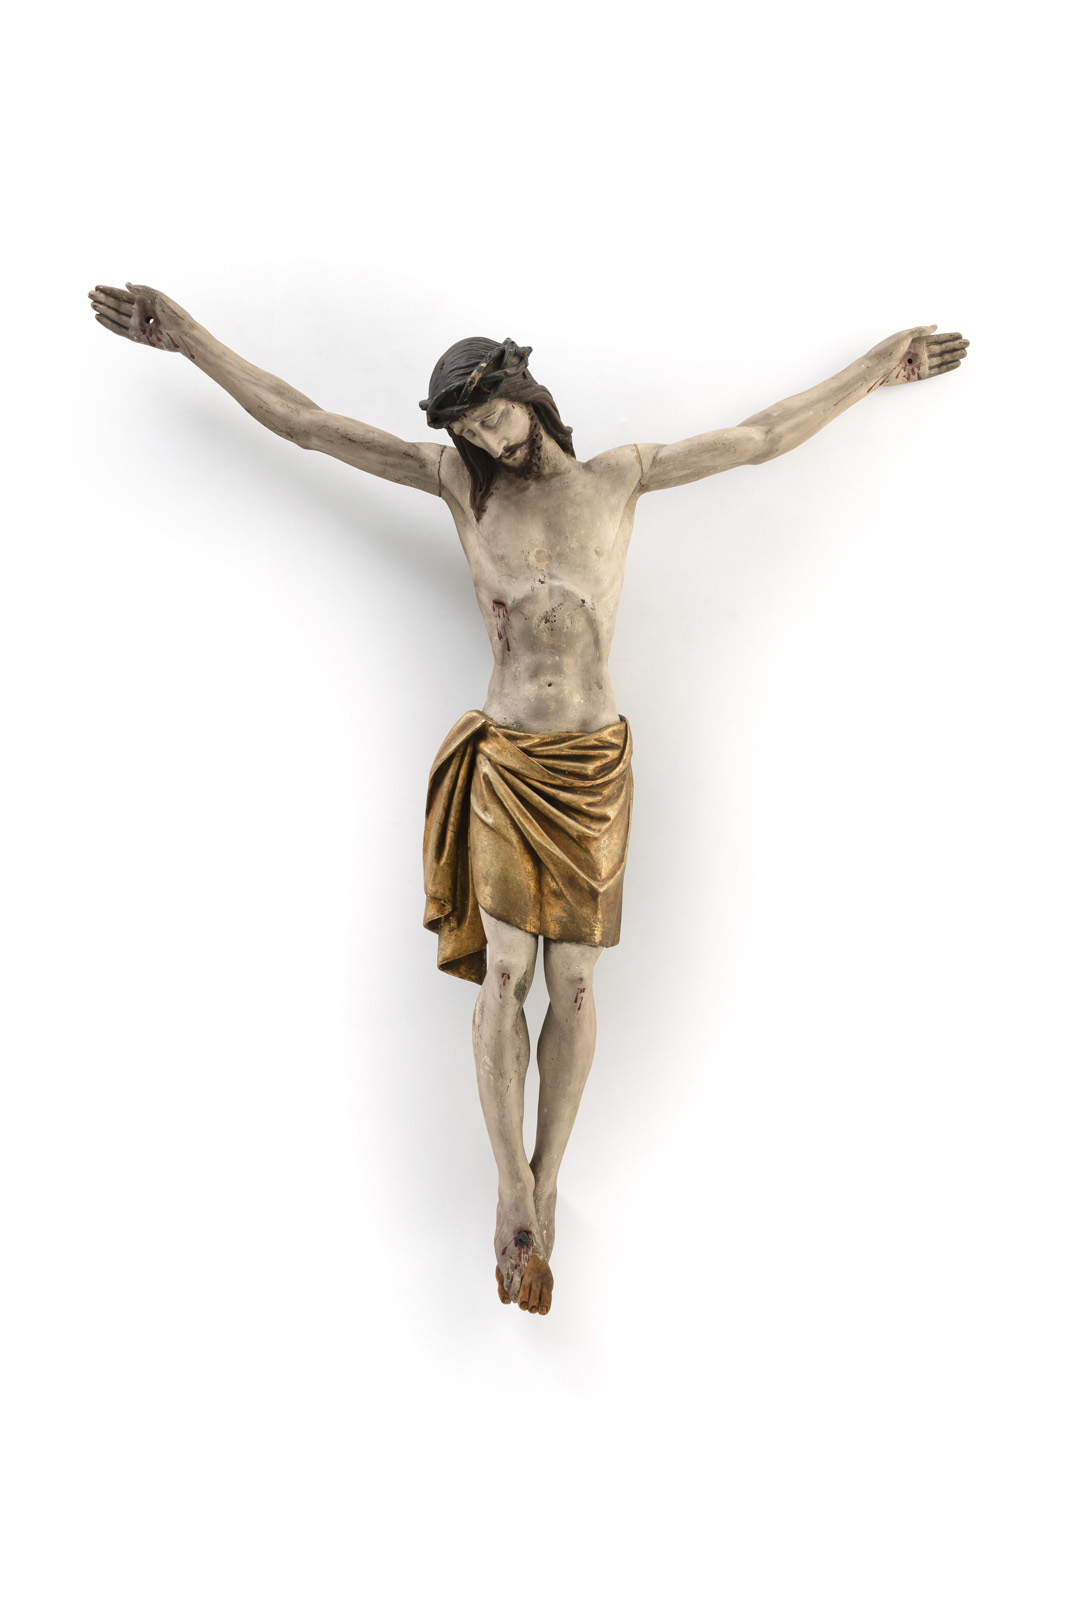 <b>A MEDIEVAL STYLE BODY OF CHRIST</b>